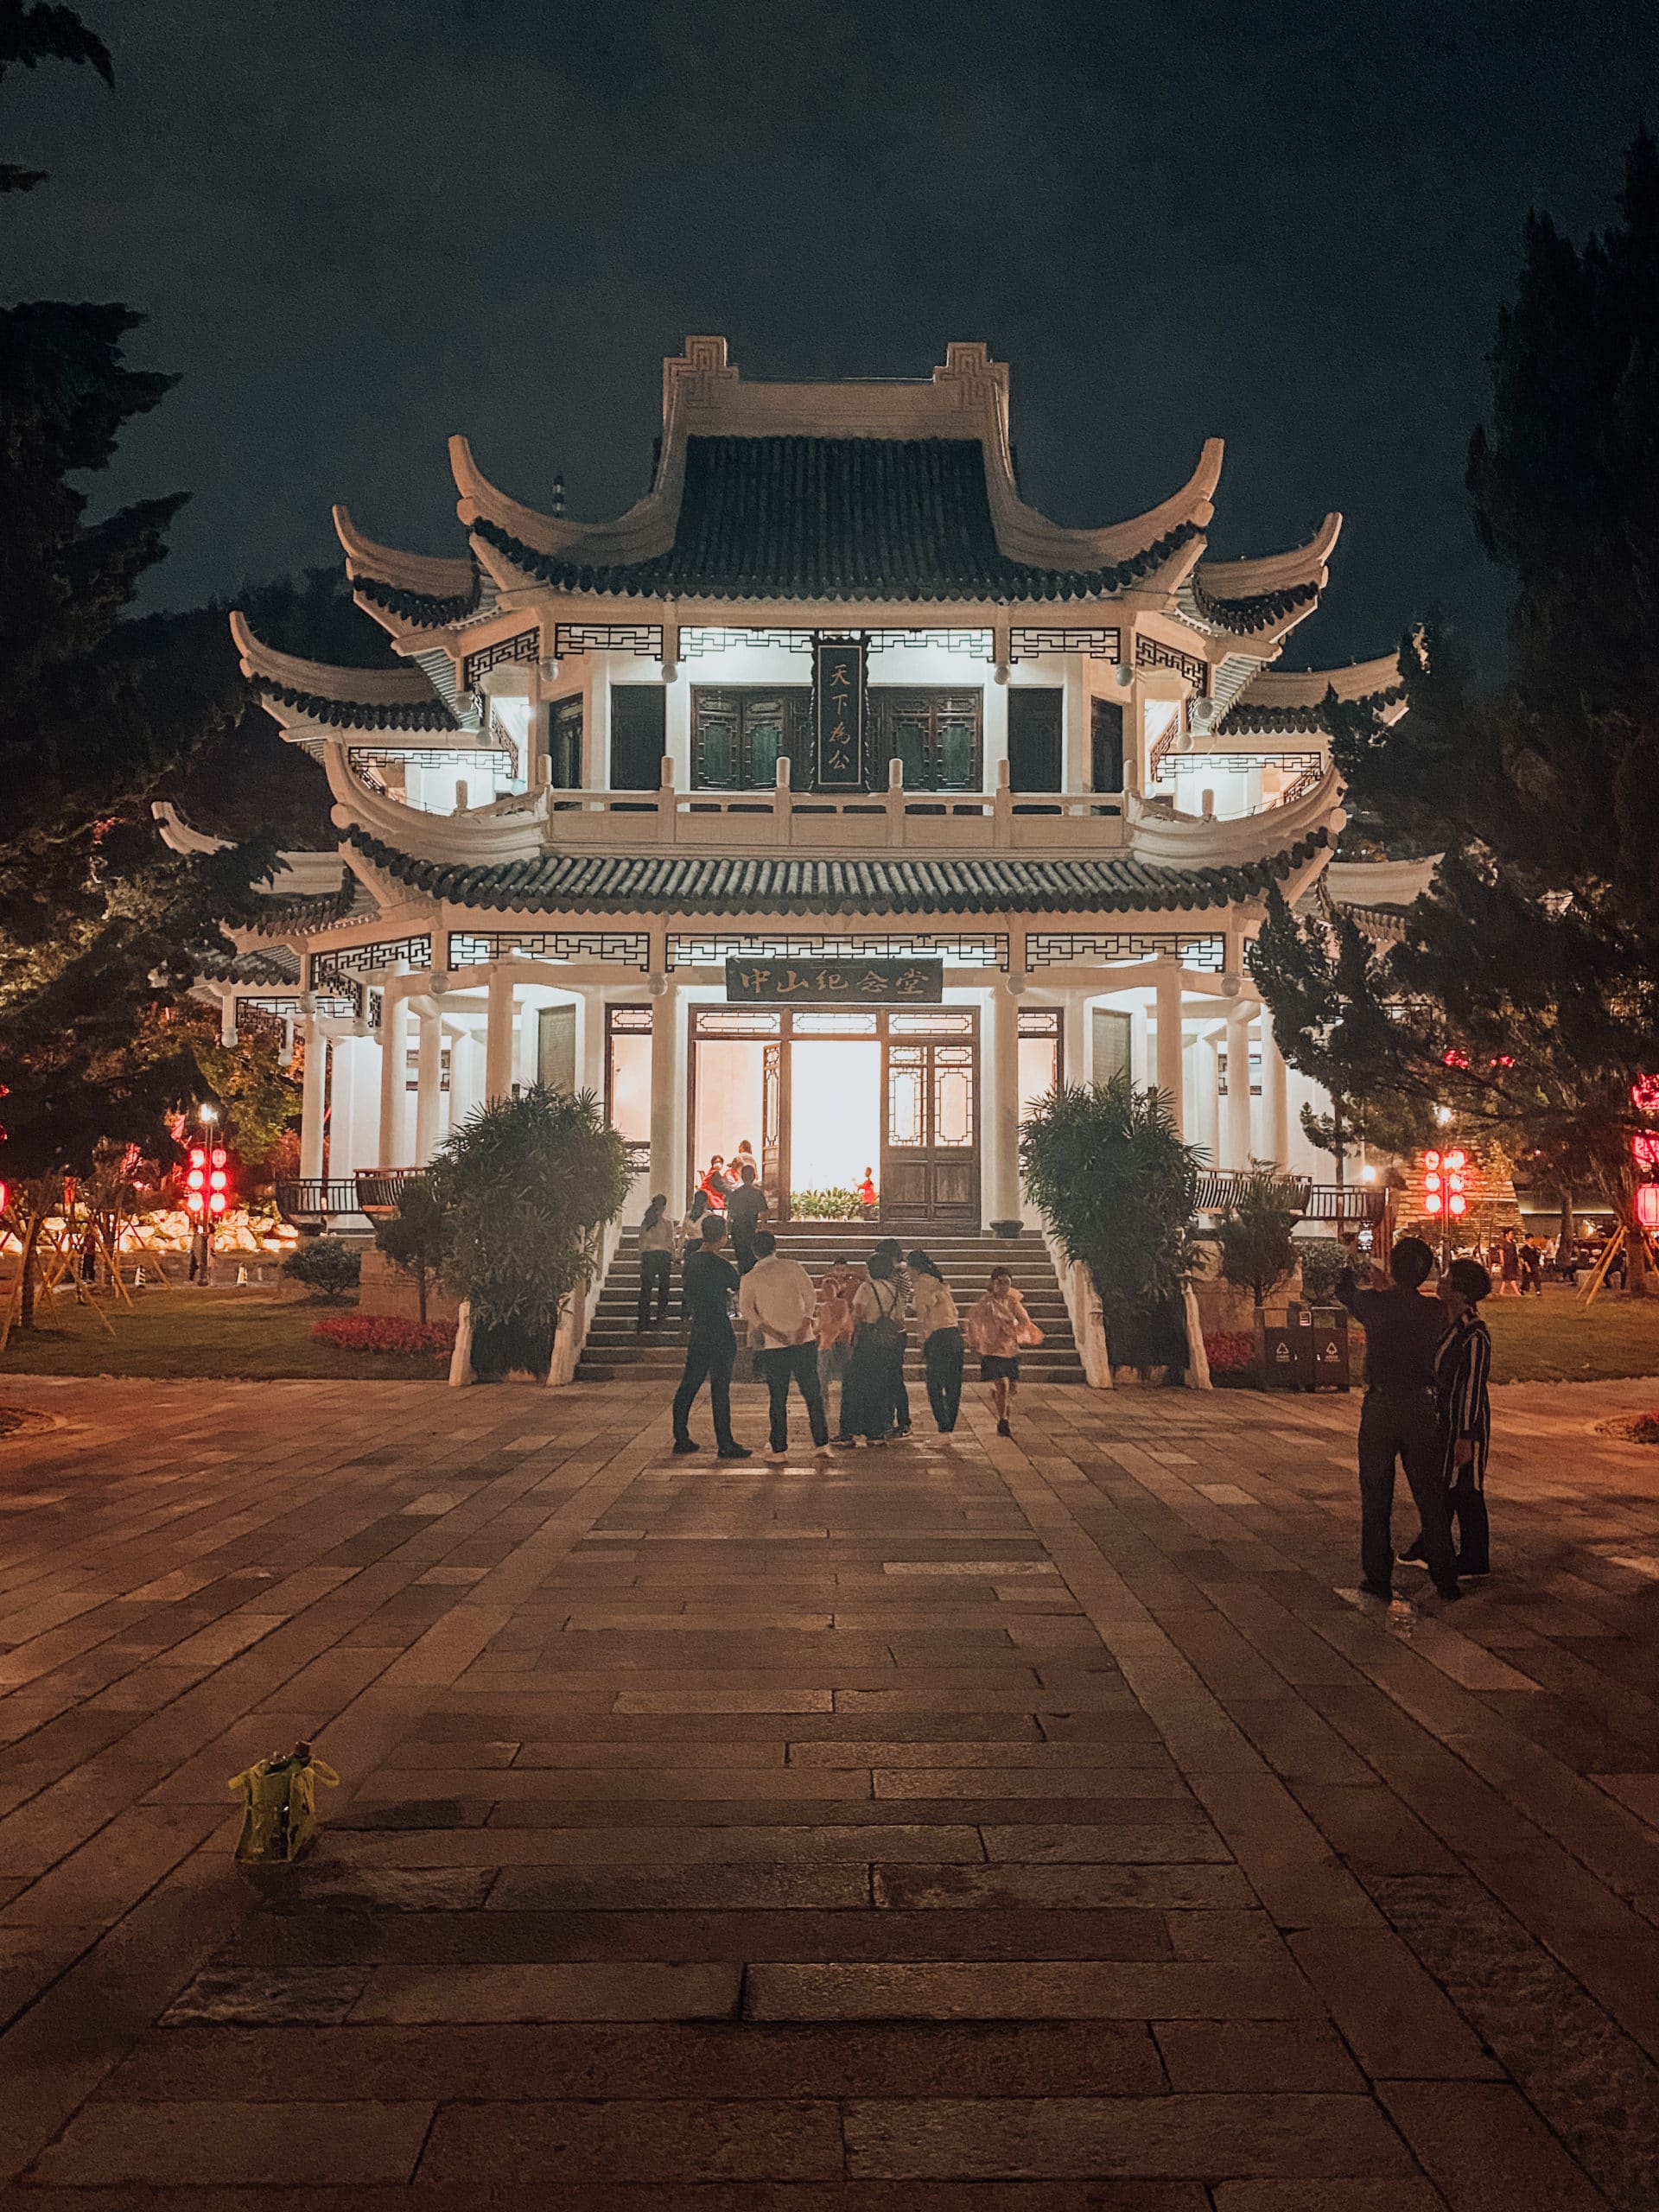 Wenzhou, Zhejiang Province – What can you actually do there?